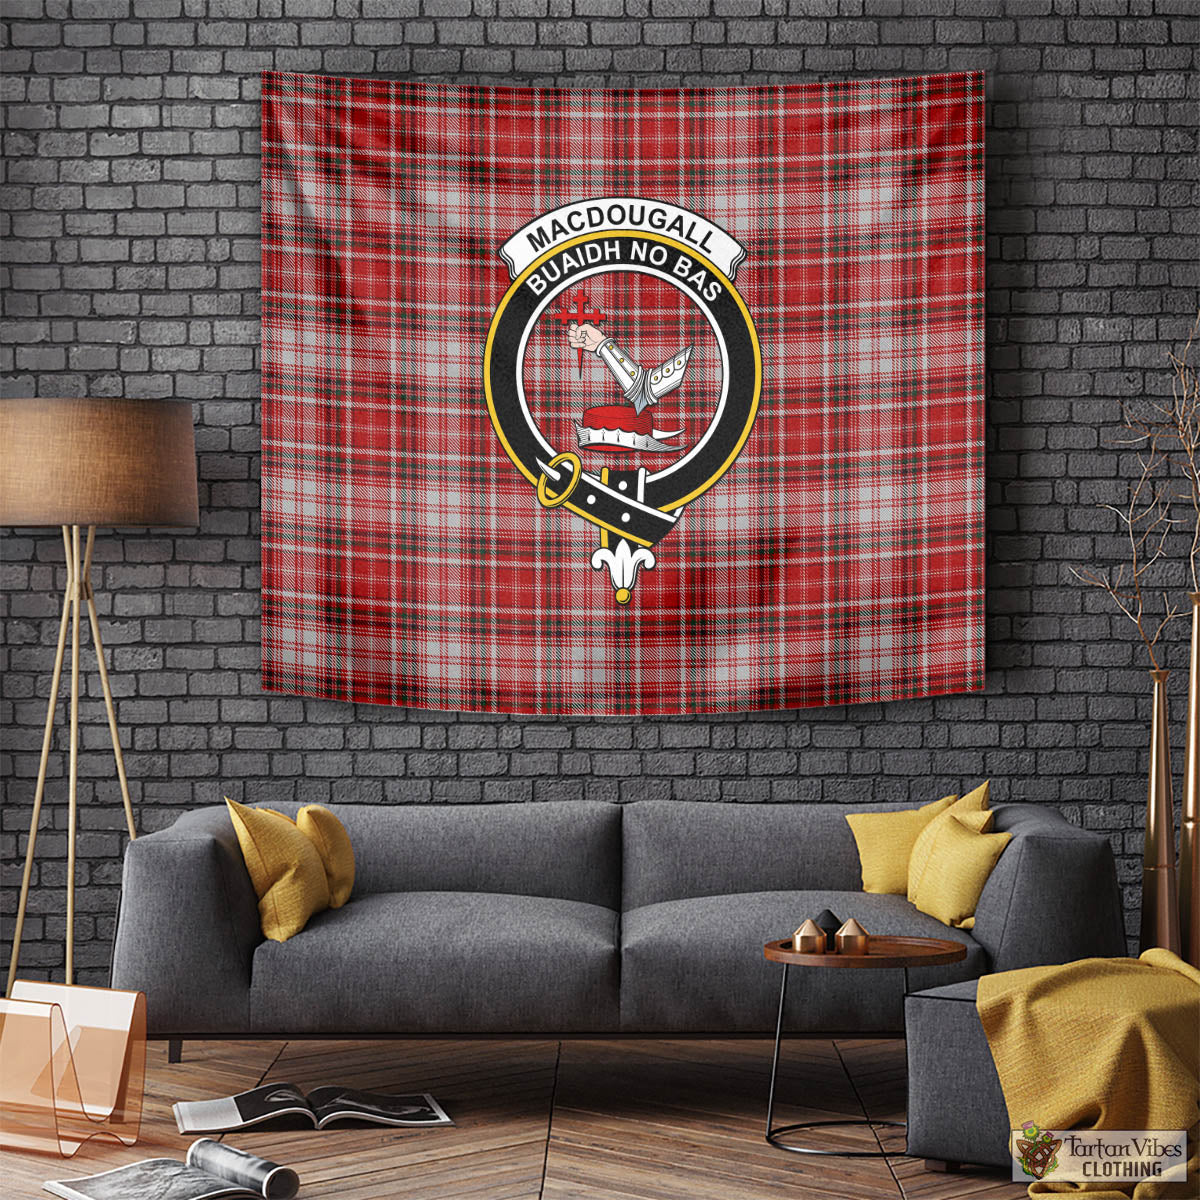 Tartan Vibes Clothing MacDougall Dress Tartan Tapestry Wall Hanging and Home Decor for Room with Family Crest